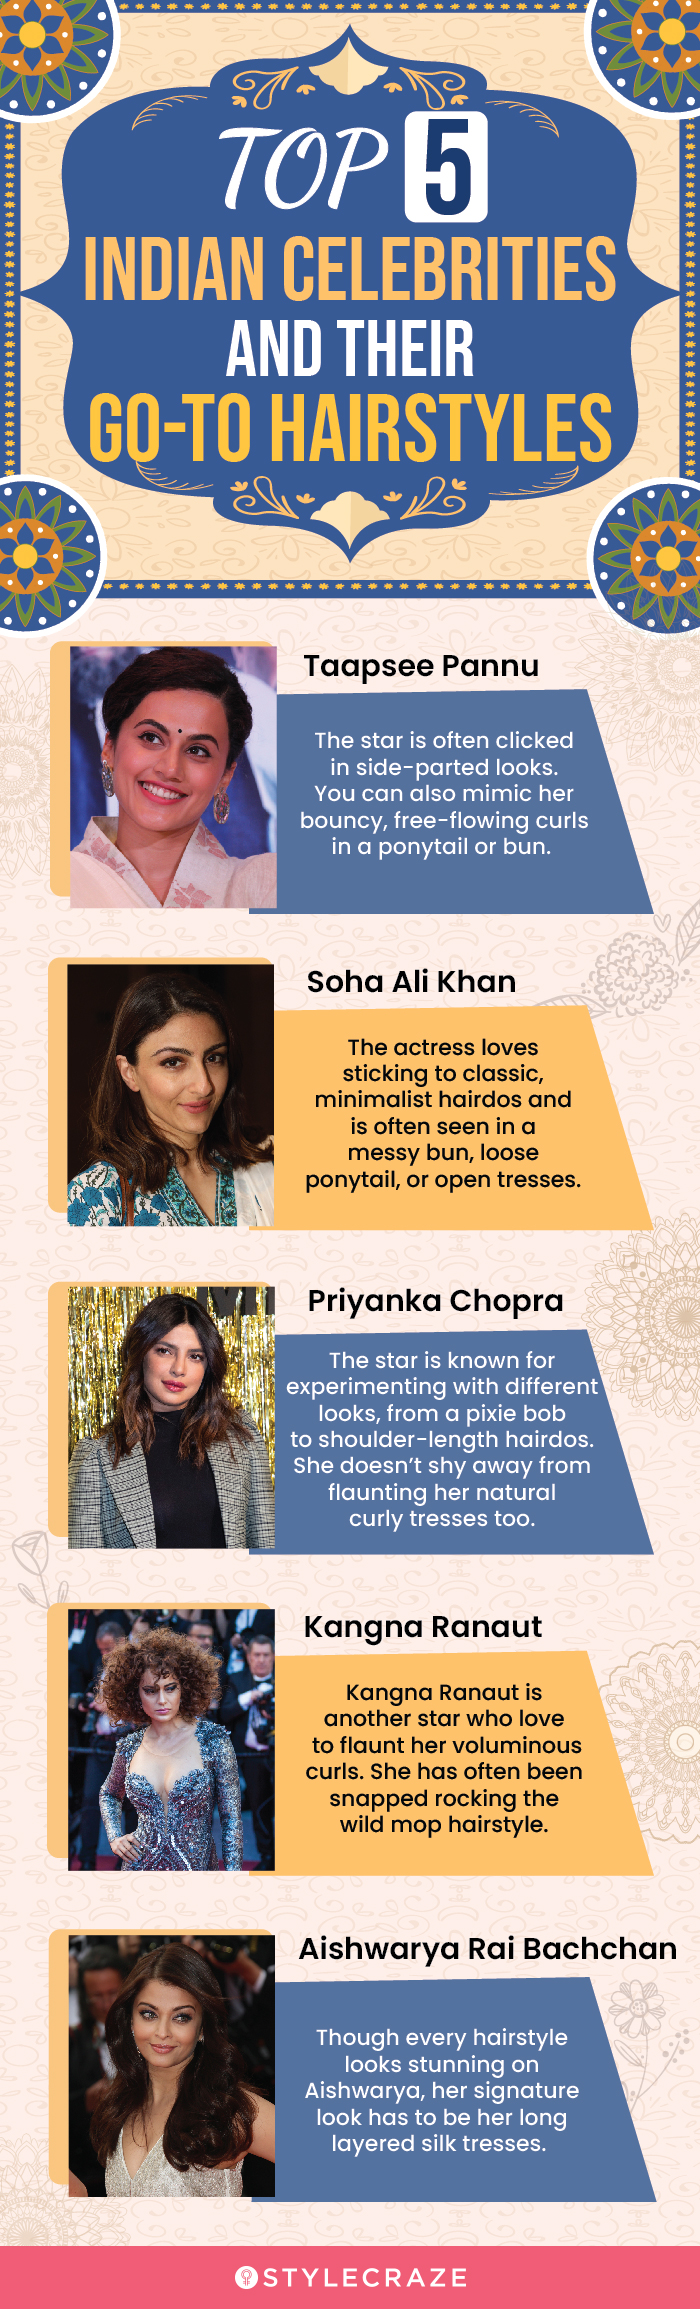 top 5 indian celebrities and their go to hairstyles (infographic)